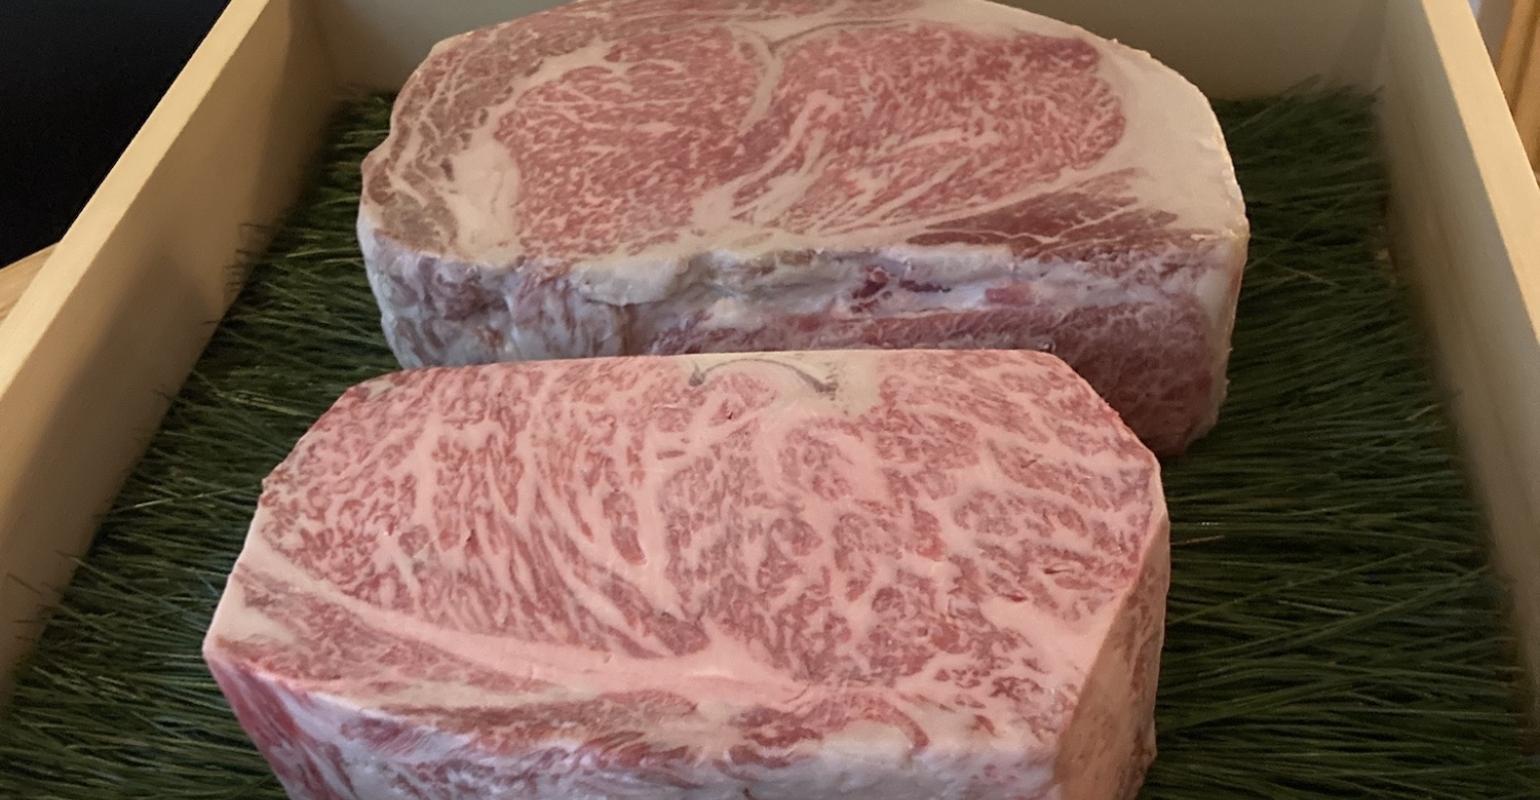 Japanese Wagyu beef menu created by 20 chefs in the USA